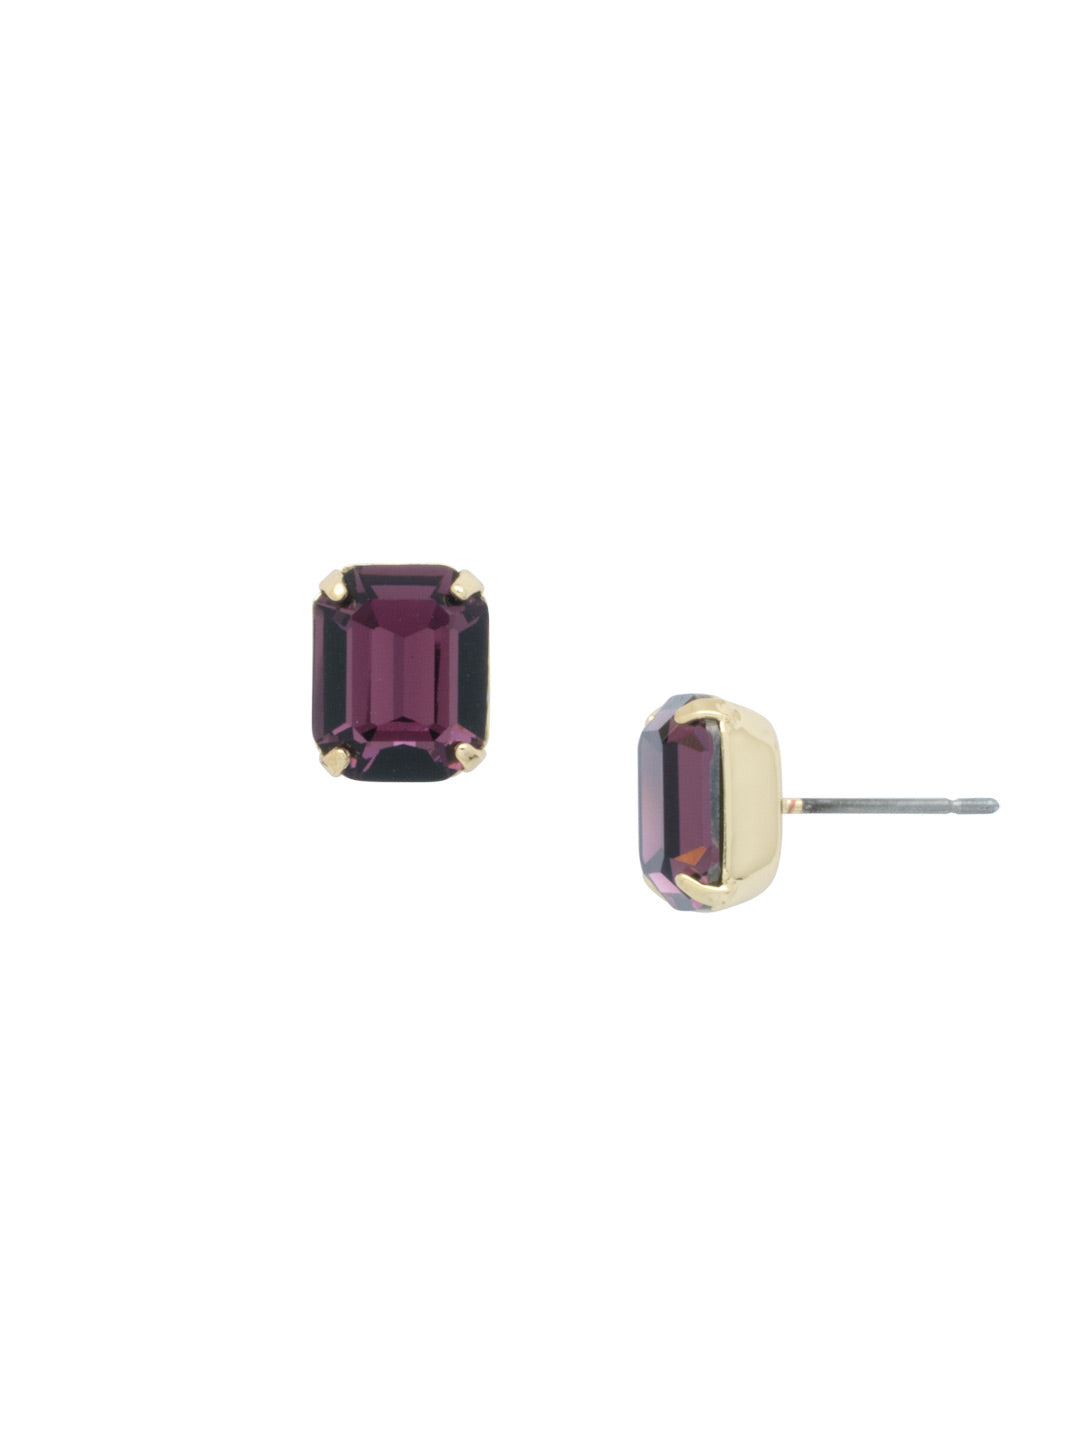 Octavia Stud Earrings - EDU53BGMRL - <p>These rounded emerald cut stud earrings can be worn alone or paired with anything for just a bit of extra bling! From Sorrelli's Merlot collection in our Bright Gold-tone finish.</p>